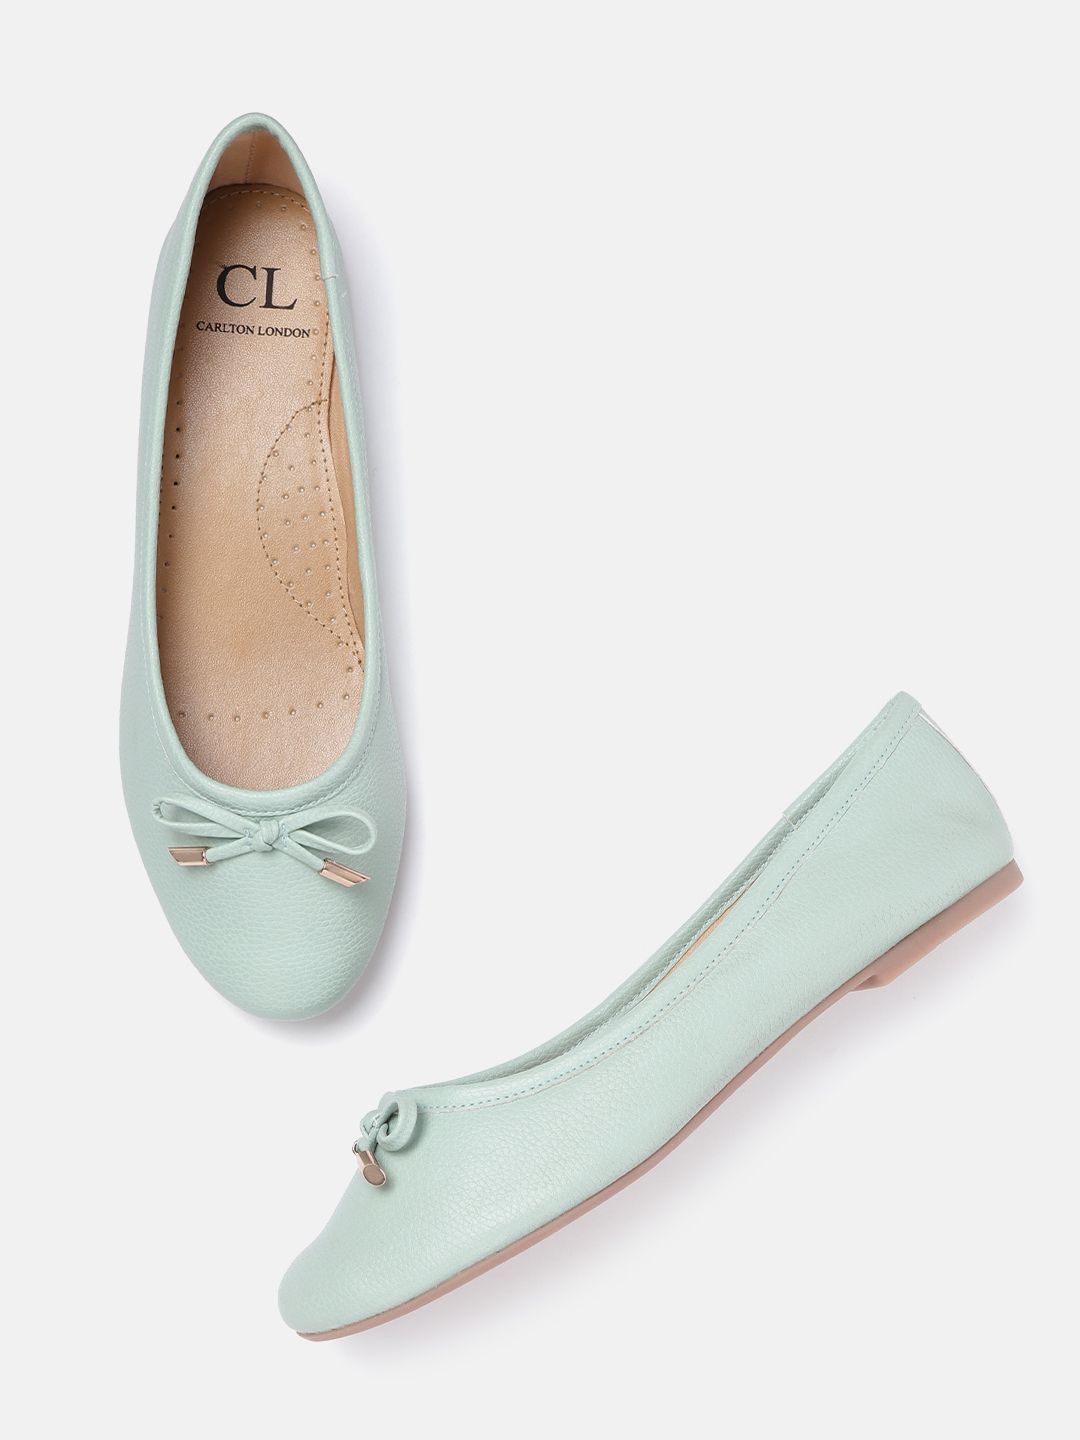 Carlton London Women Mint Green Textured Ballerinas with Bow Detail Price in India